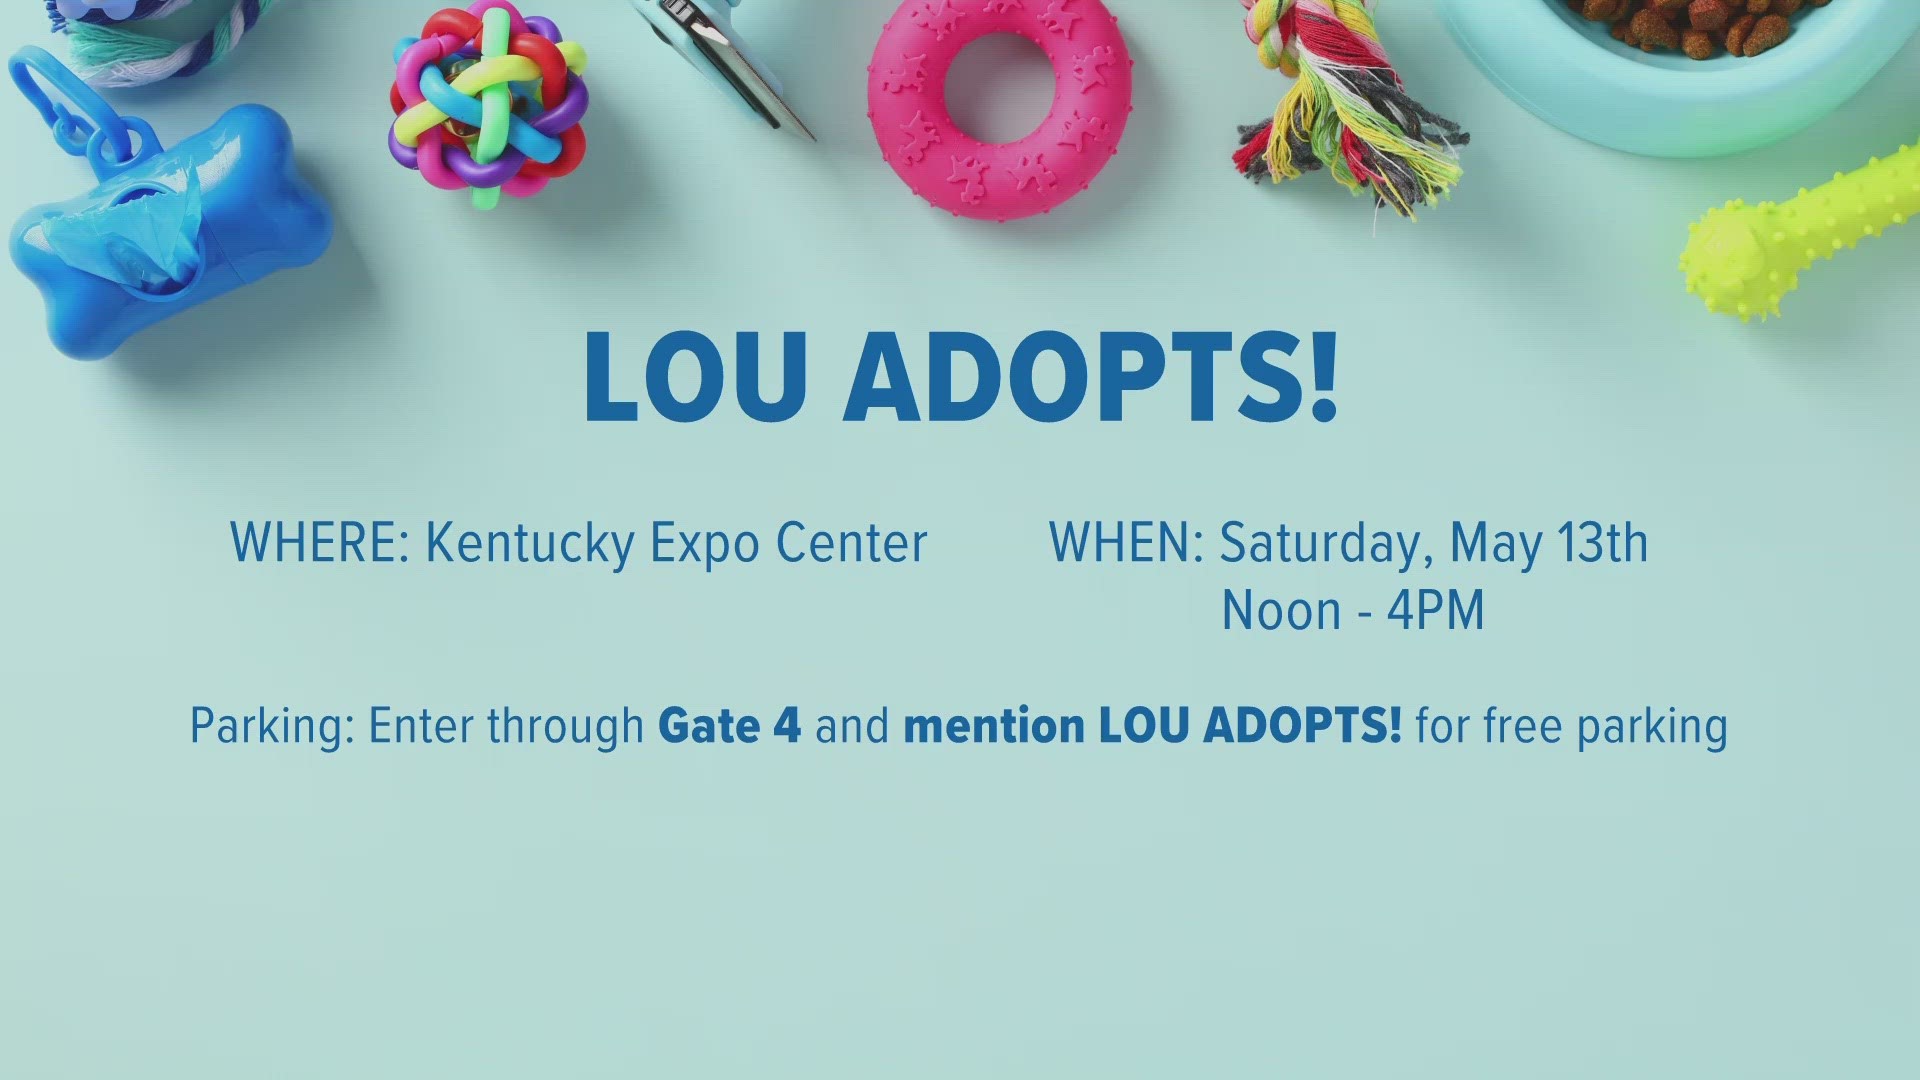 Nearly 100 dogs and puppies will be at the Expo Center on May 13, ready for forever homes.